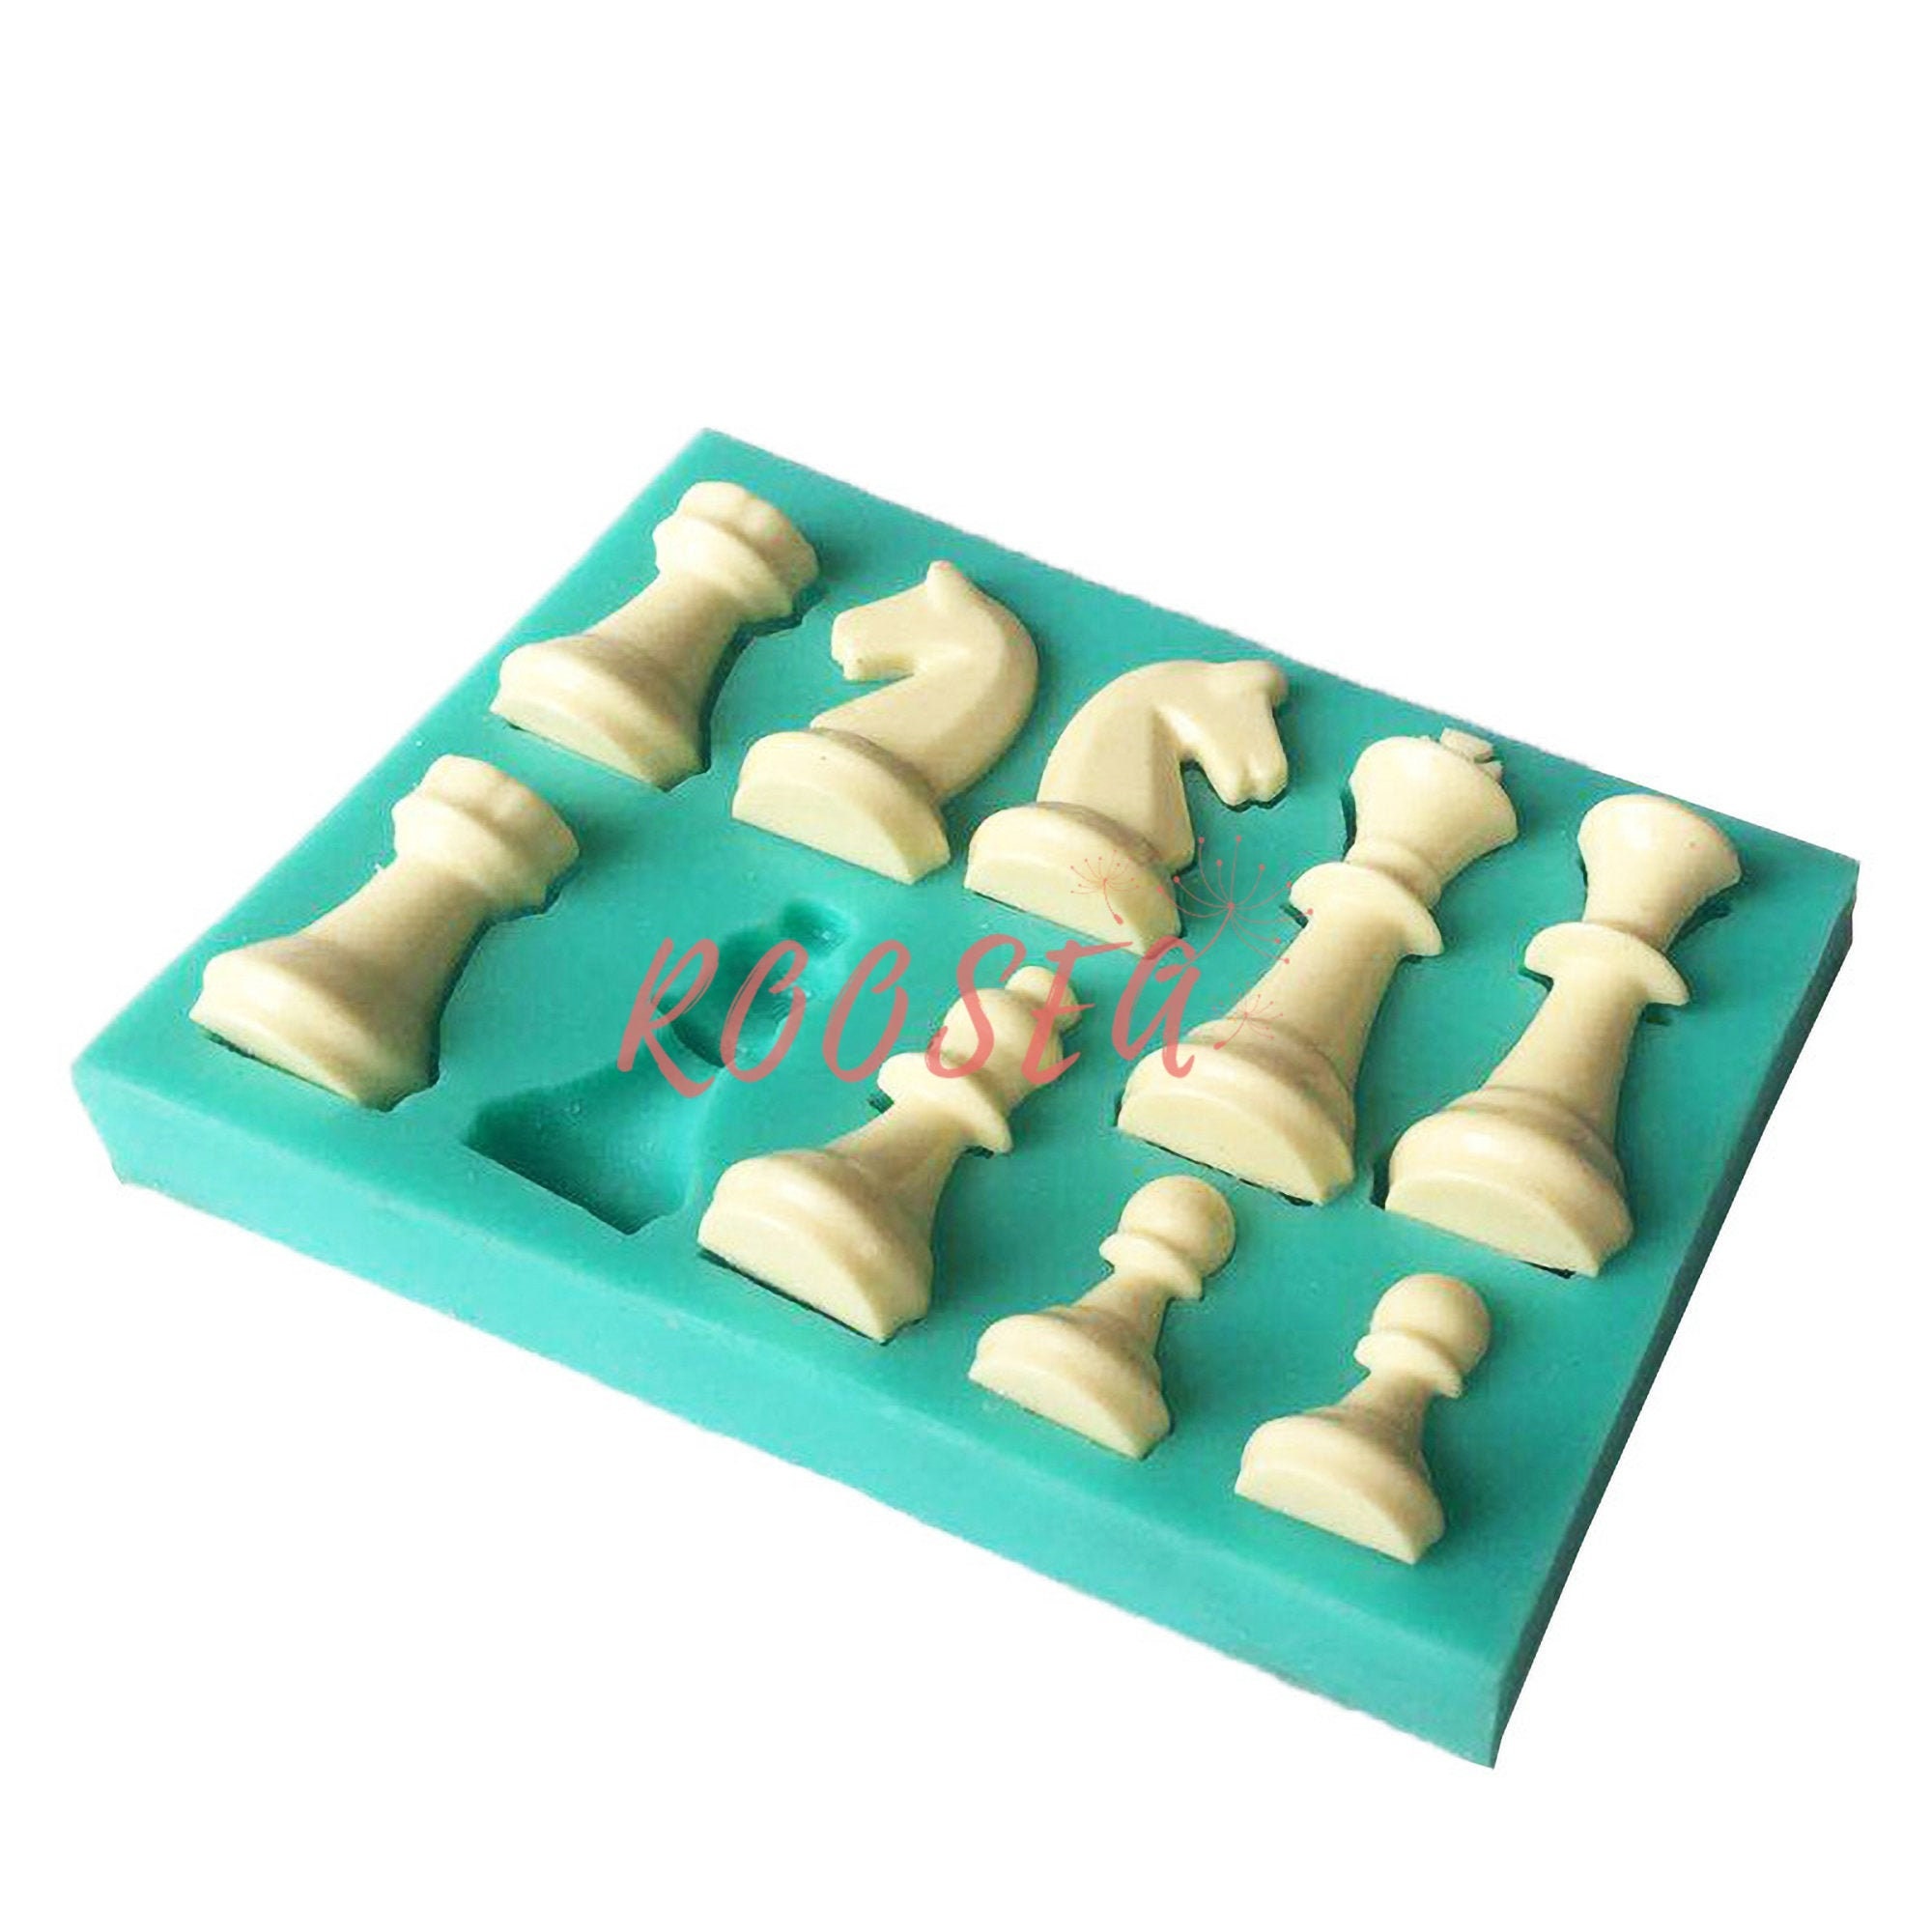 Chess Board Mold for Resin, Chess Resin Molds Tool for Classic Checkers  Board Game, Checkers Board Crystal Epoxy Resin Casting Mold for DIY Resin